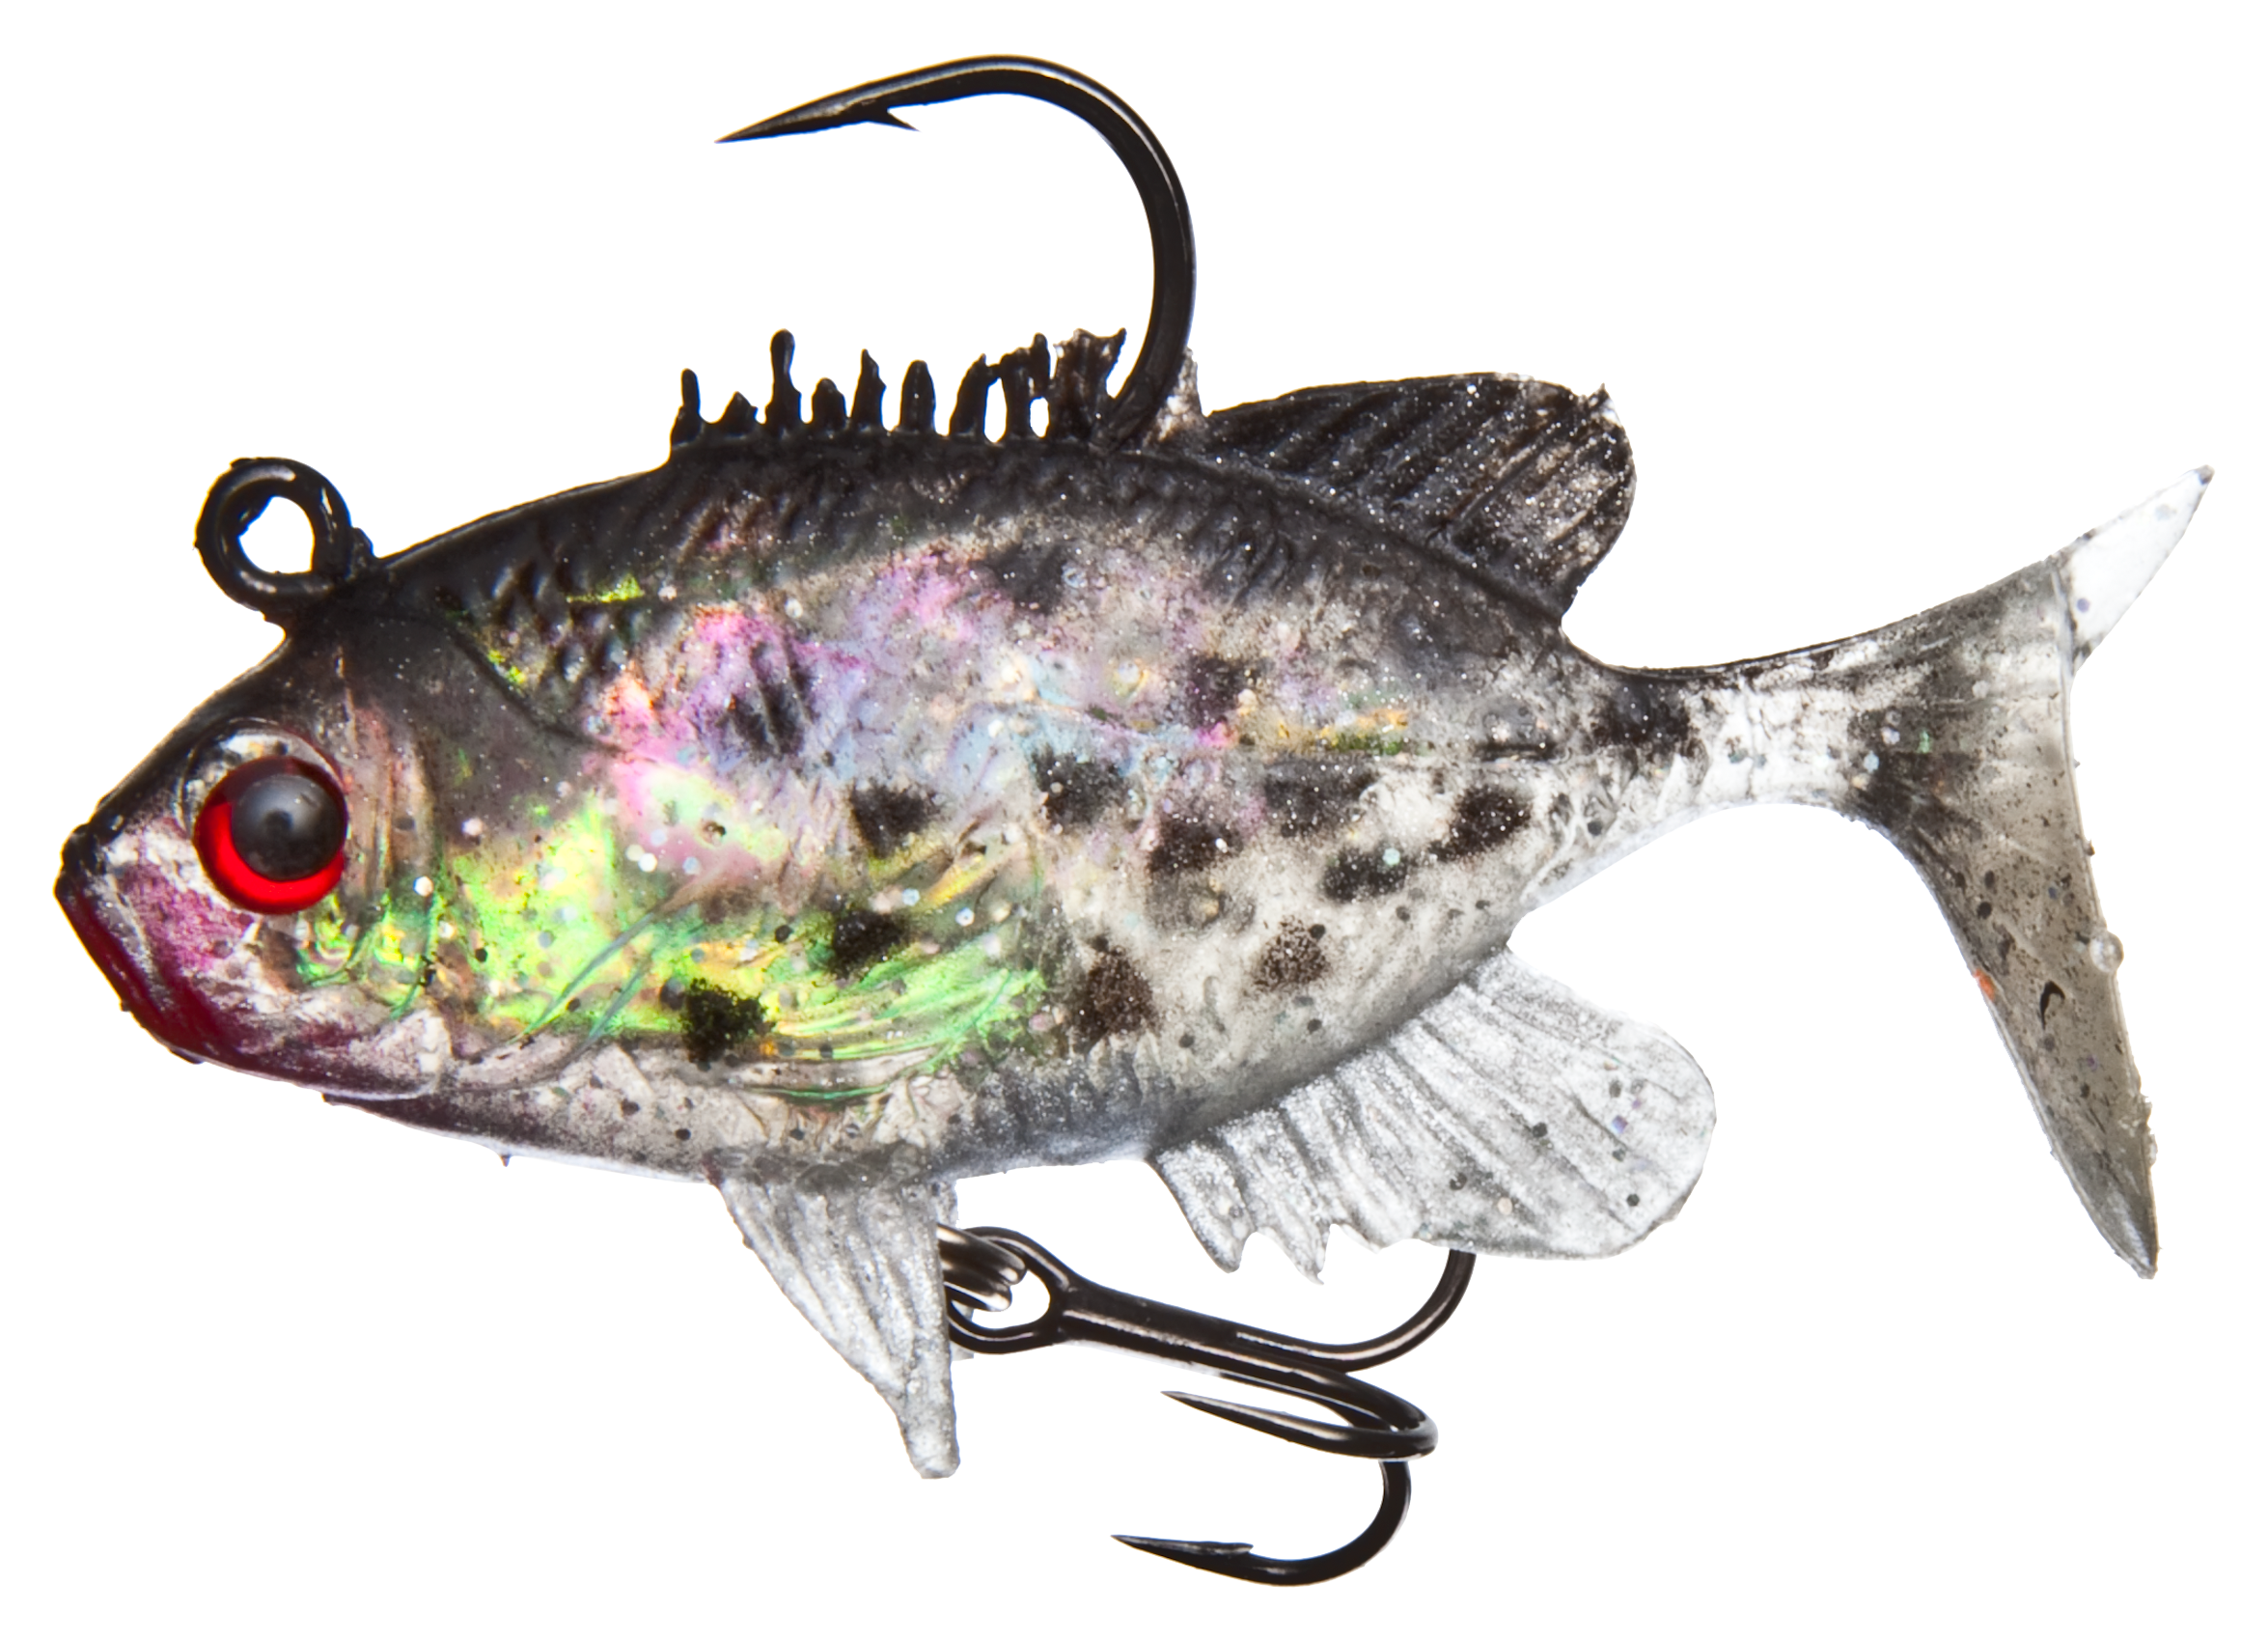 Storm WildEye Live Crappie 02 Swimbait Lure - 2 Inches - 3 Pack